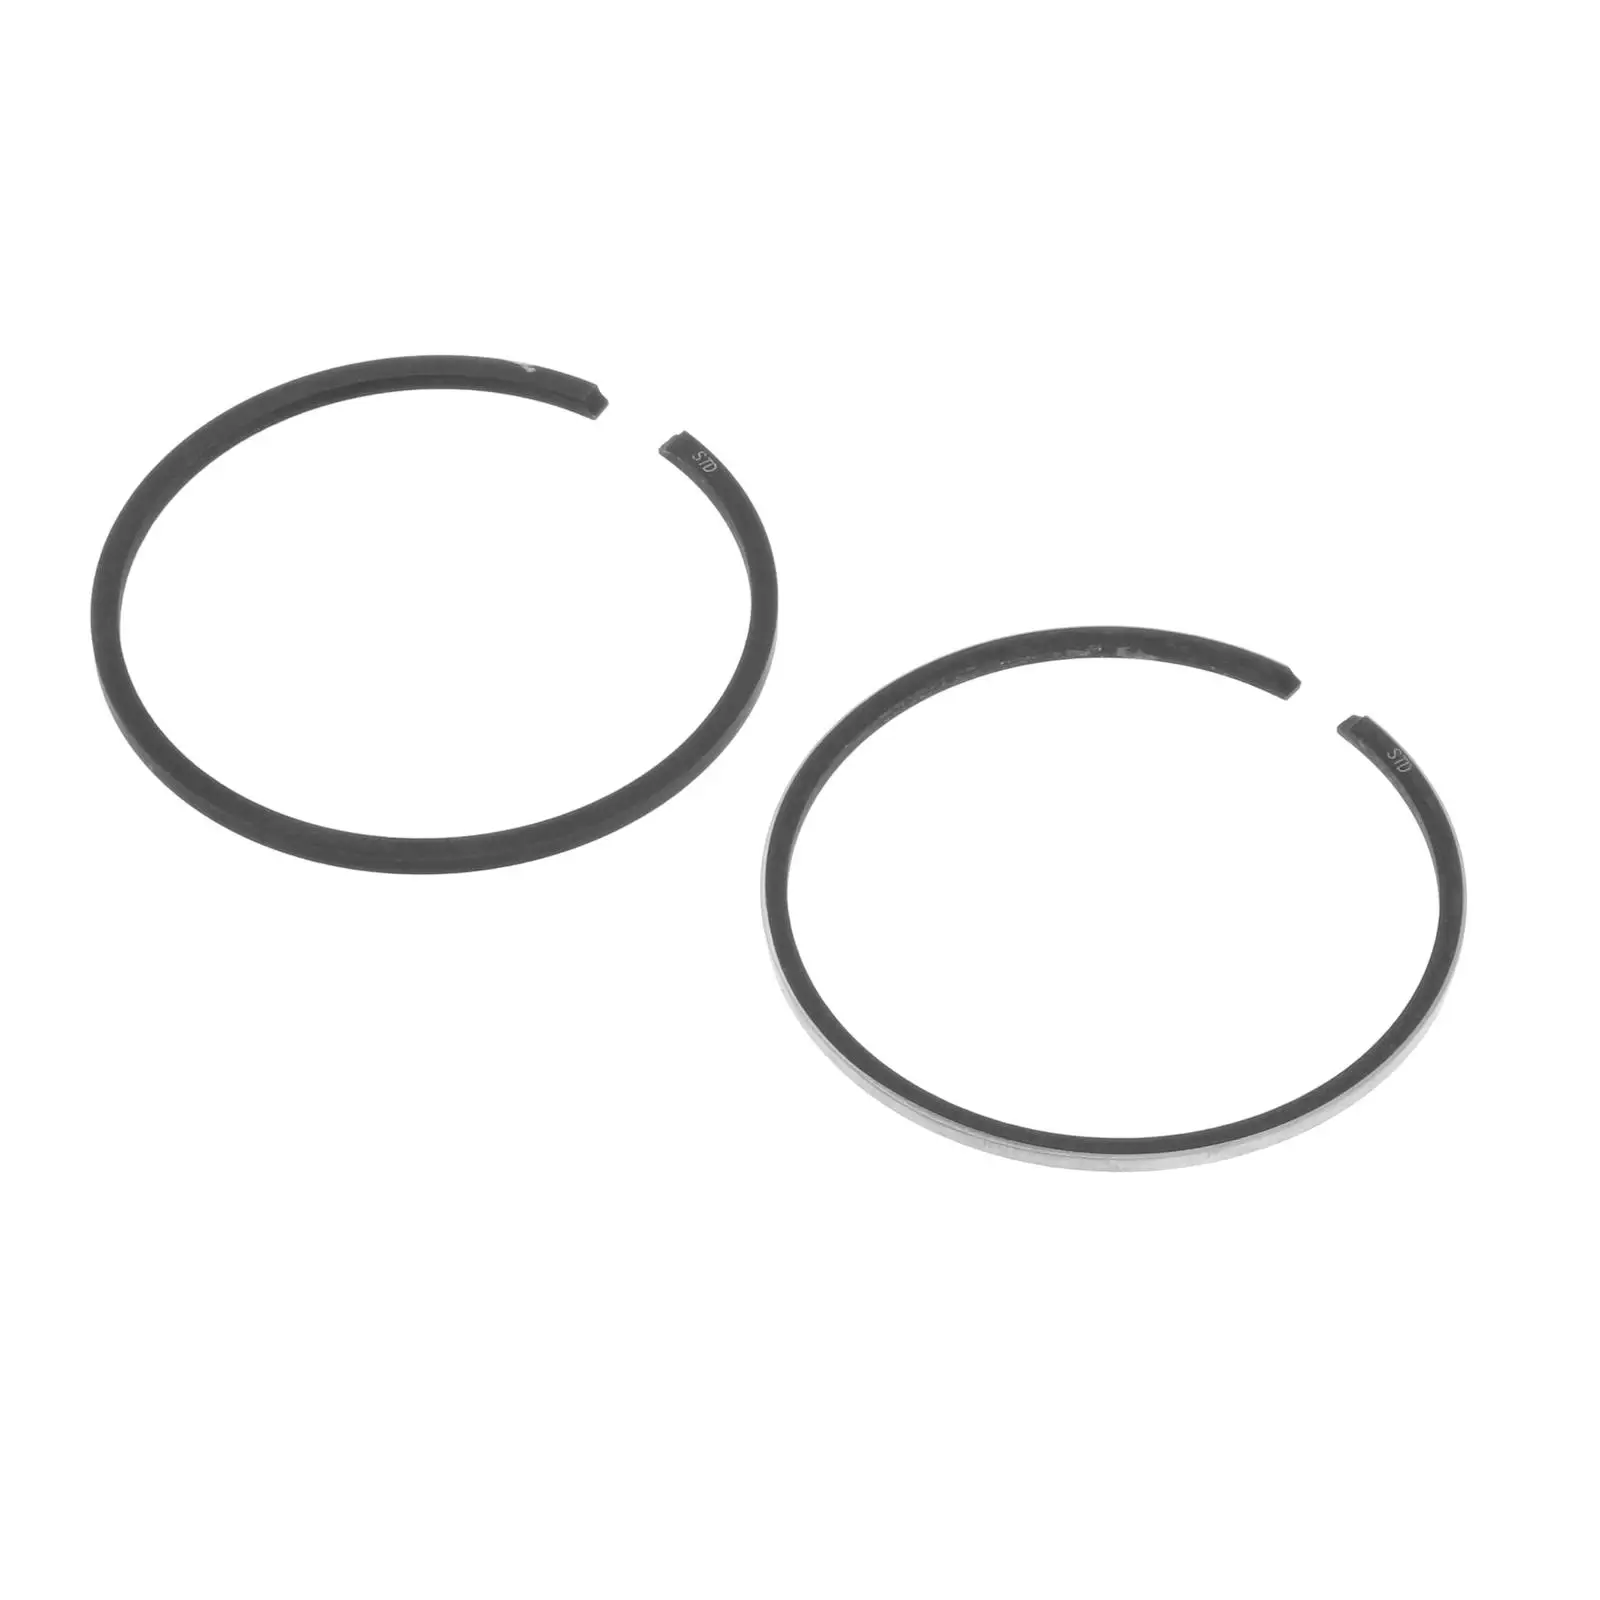 No. 682-11610-01-00 Engine Piston Rings for Hidea 9.9HP 15HP Marine Outboards Motors, Set of 2pcs